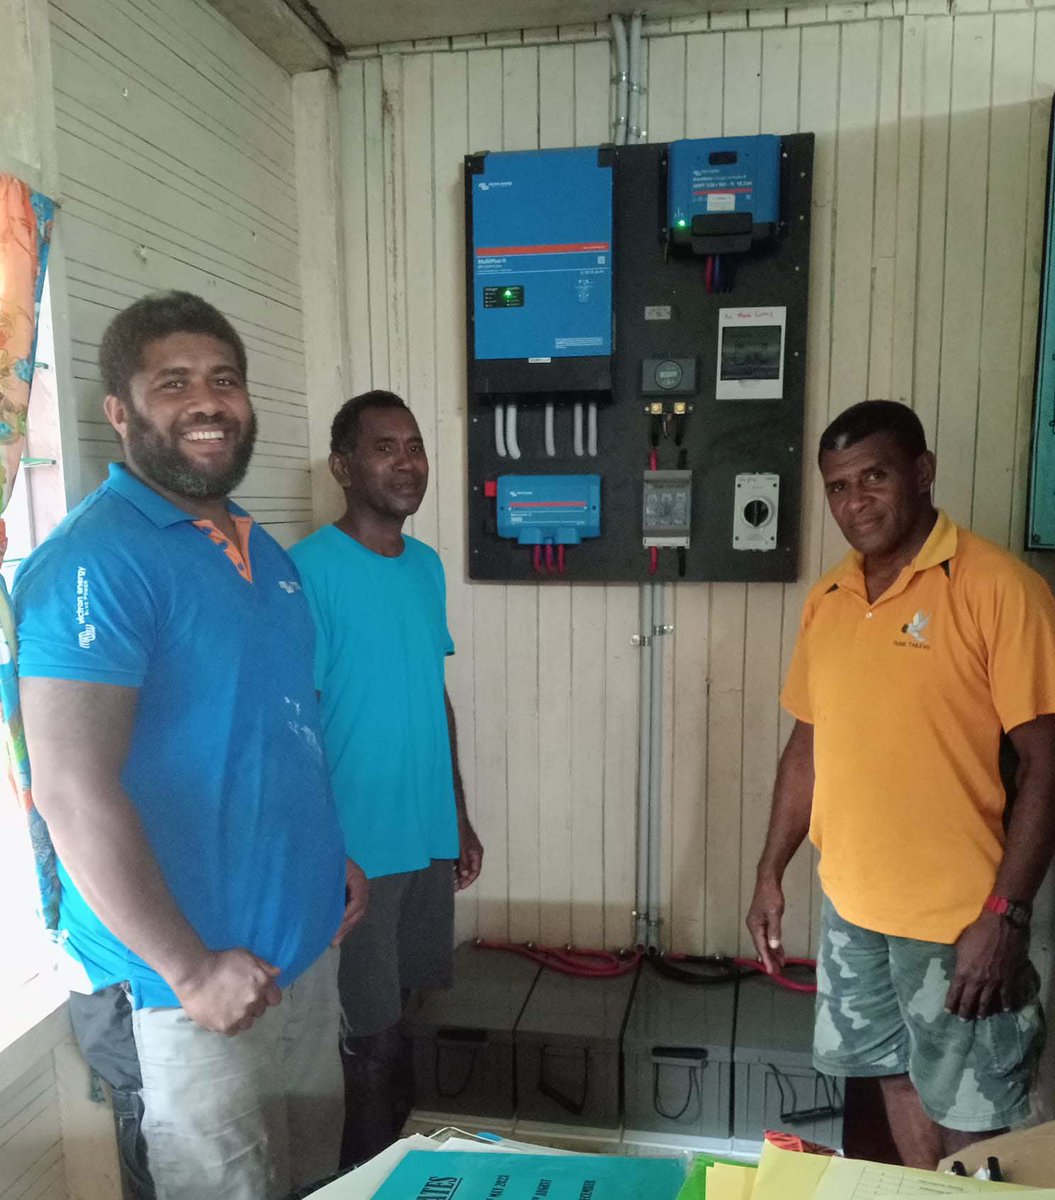 4.98kWp Off-grid Solar System for Kaba Primary School in Tailevu solarfiji.org/offgrid-solar-… We also completed the electrical wiring for the entire school. #solarfiji #victronenergy #renewableenergy #offgridsolar #school #communityproject #solarsystem #kabaprimaryschool